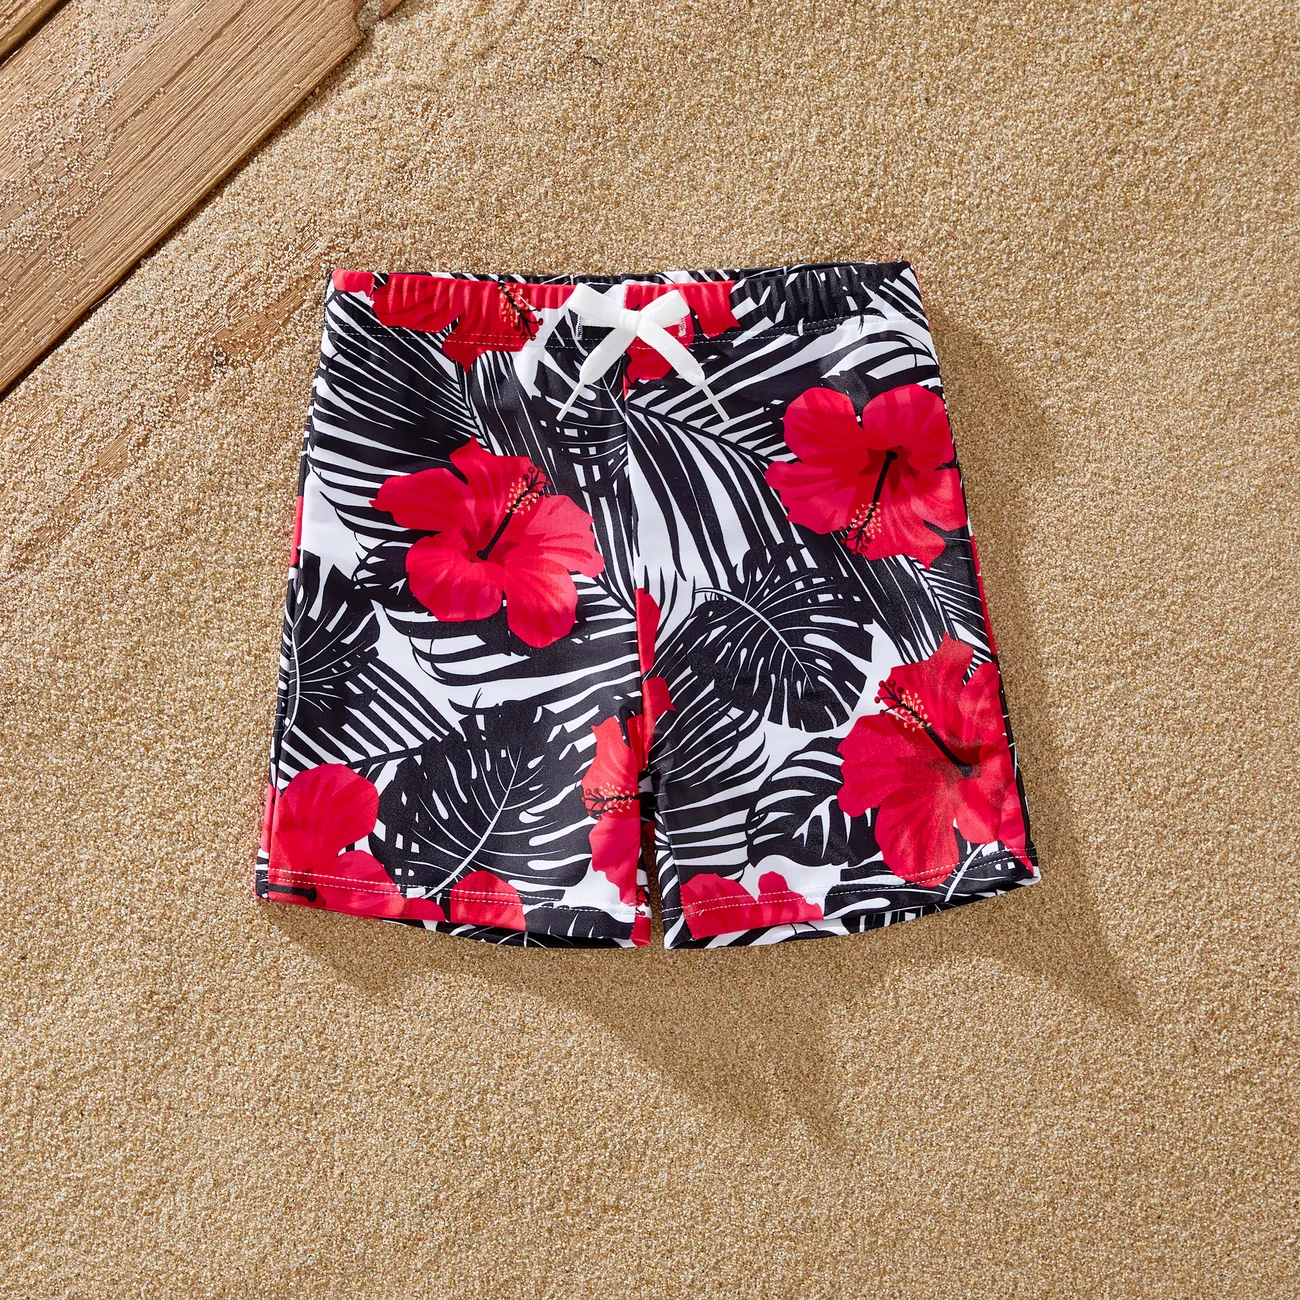 Family Matching Drawstring Swim Trunks or Red Floral Cut Out Ruffle One-Piece Swimsuit Dark -Pink big image 1